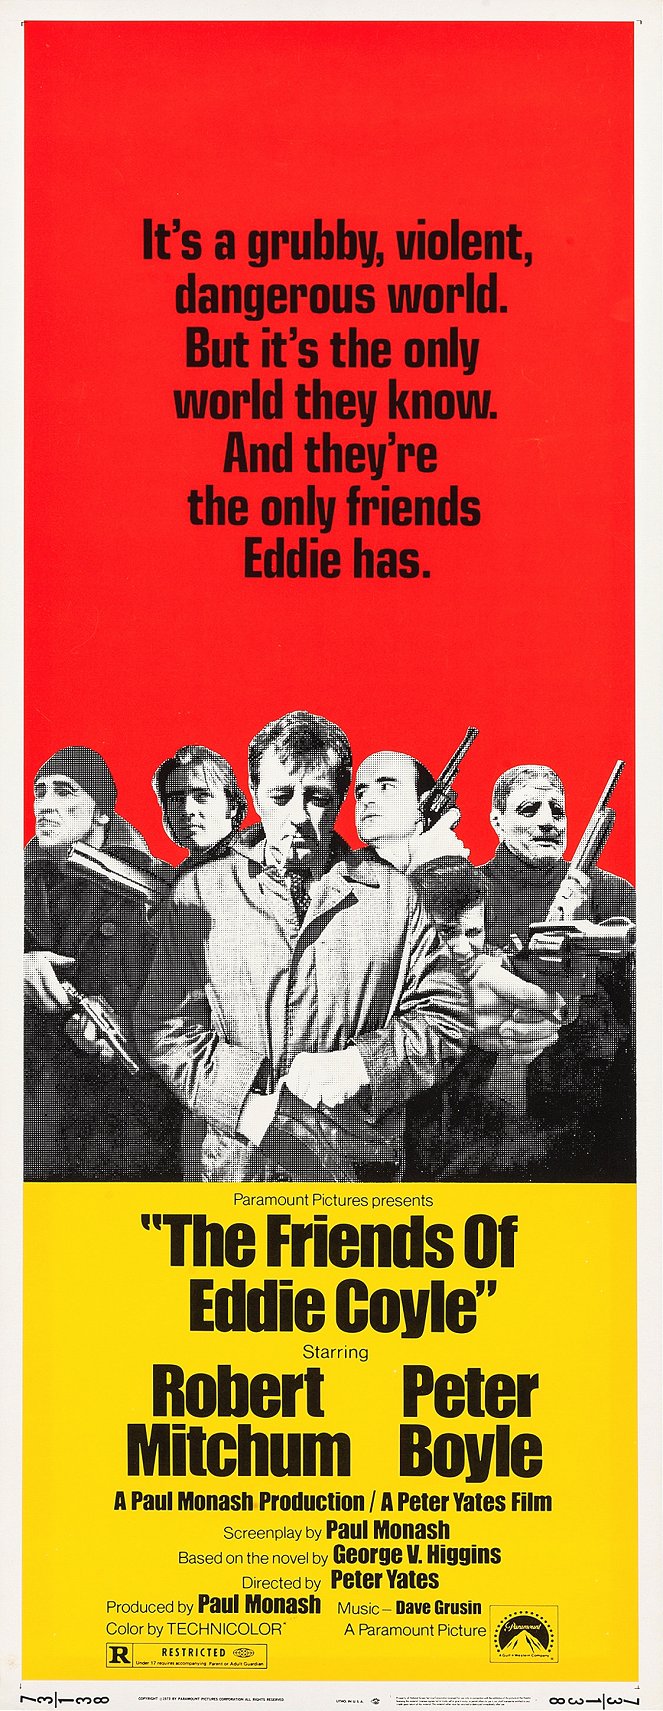 The Friends of Eddie Coyle - Posters